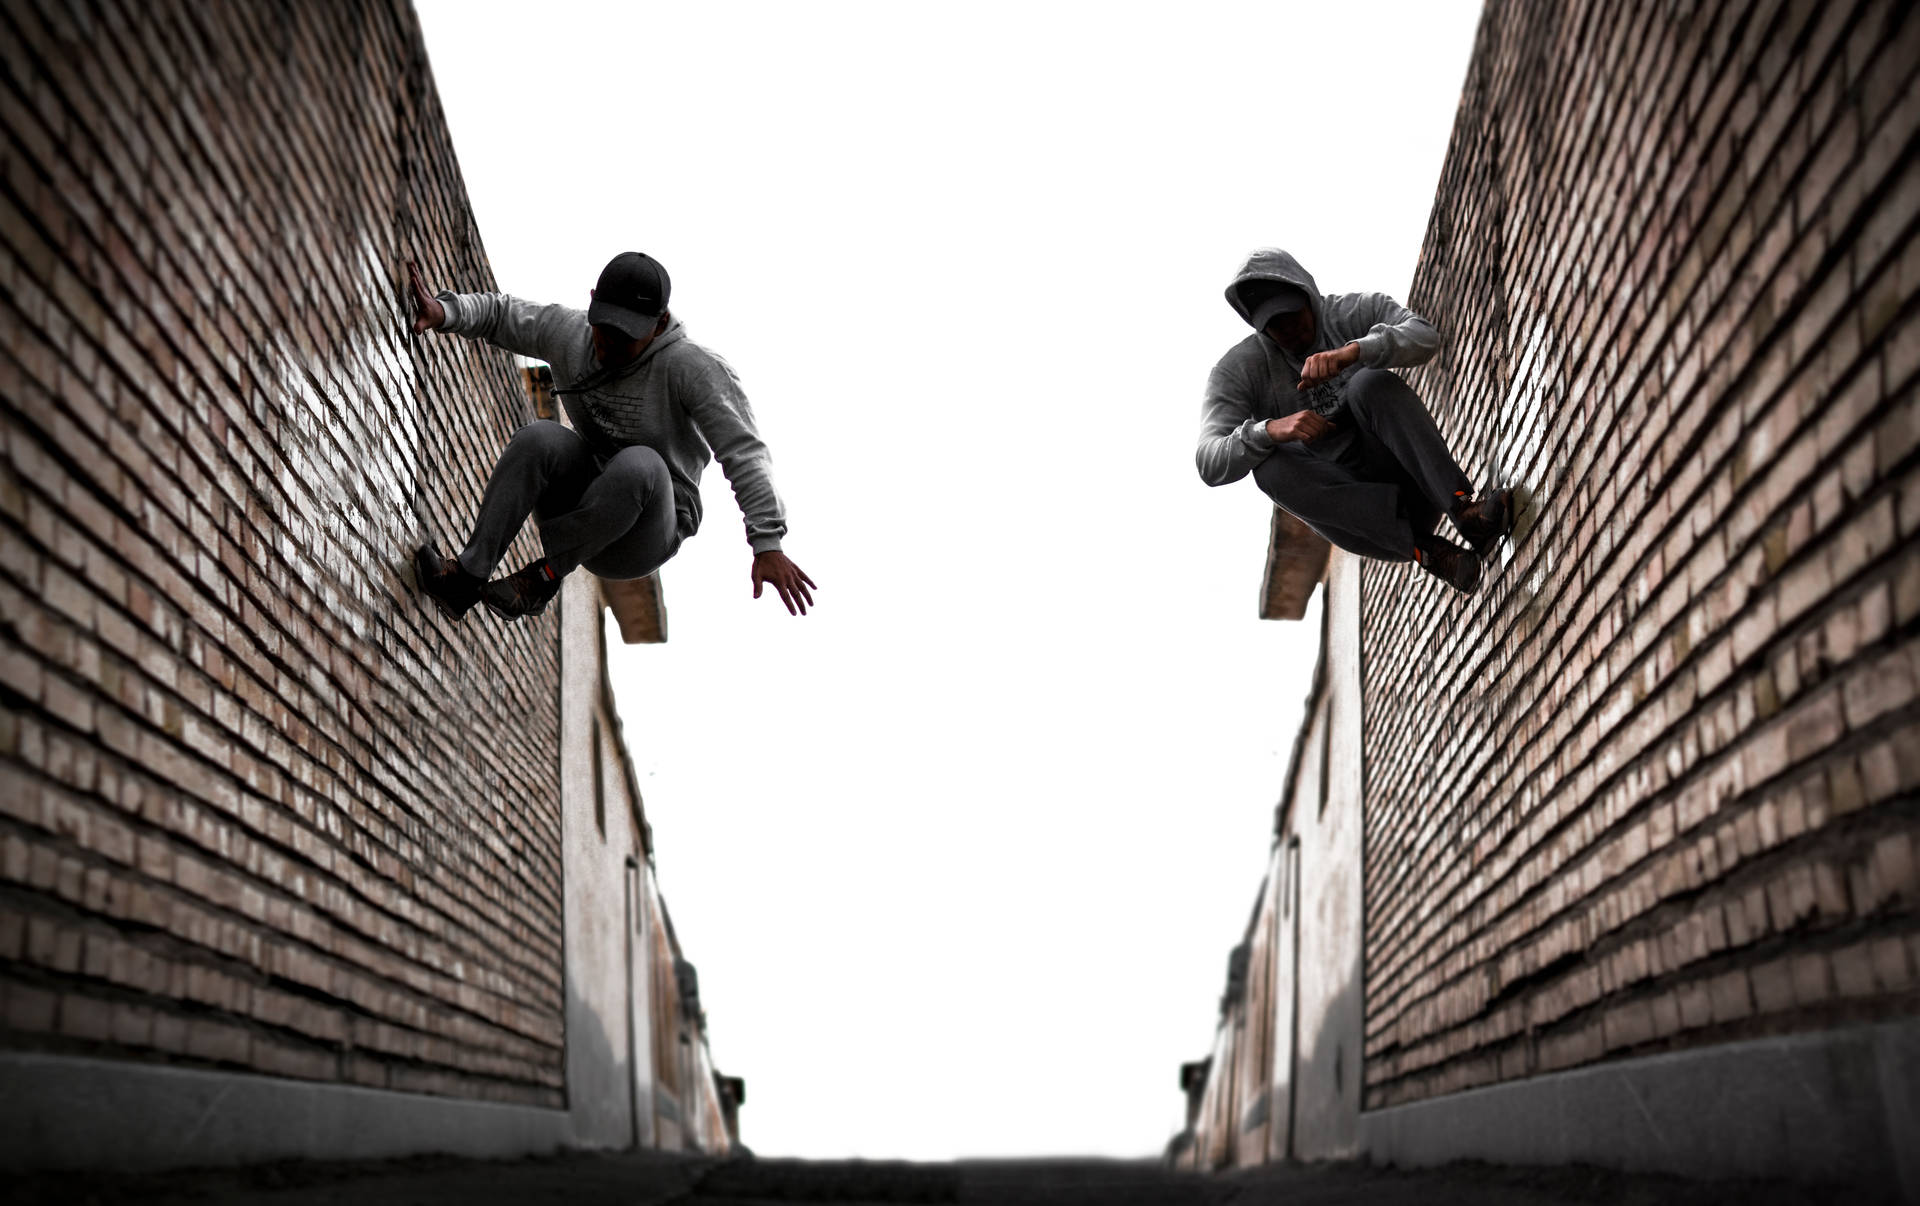 Synchronize Parkour On Brick Wall Wallpaper